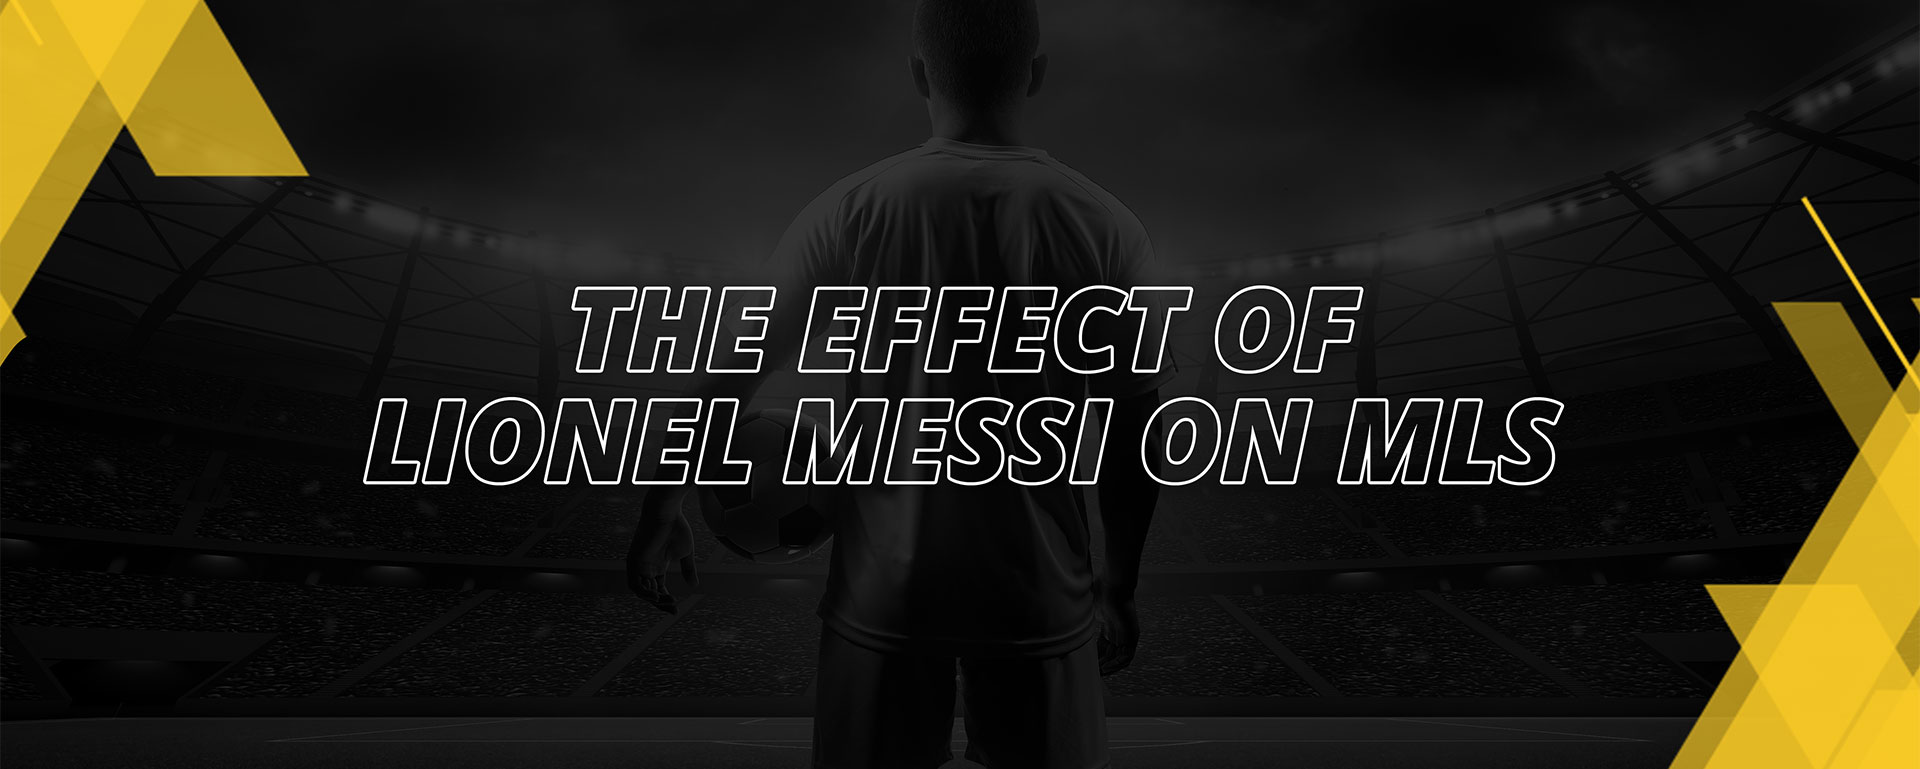 THE EFFECT OF LIONEL MESSI ON MLS